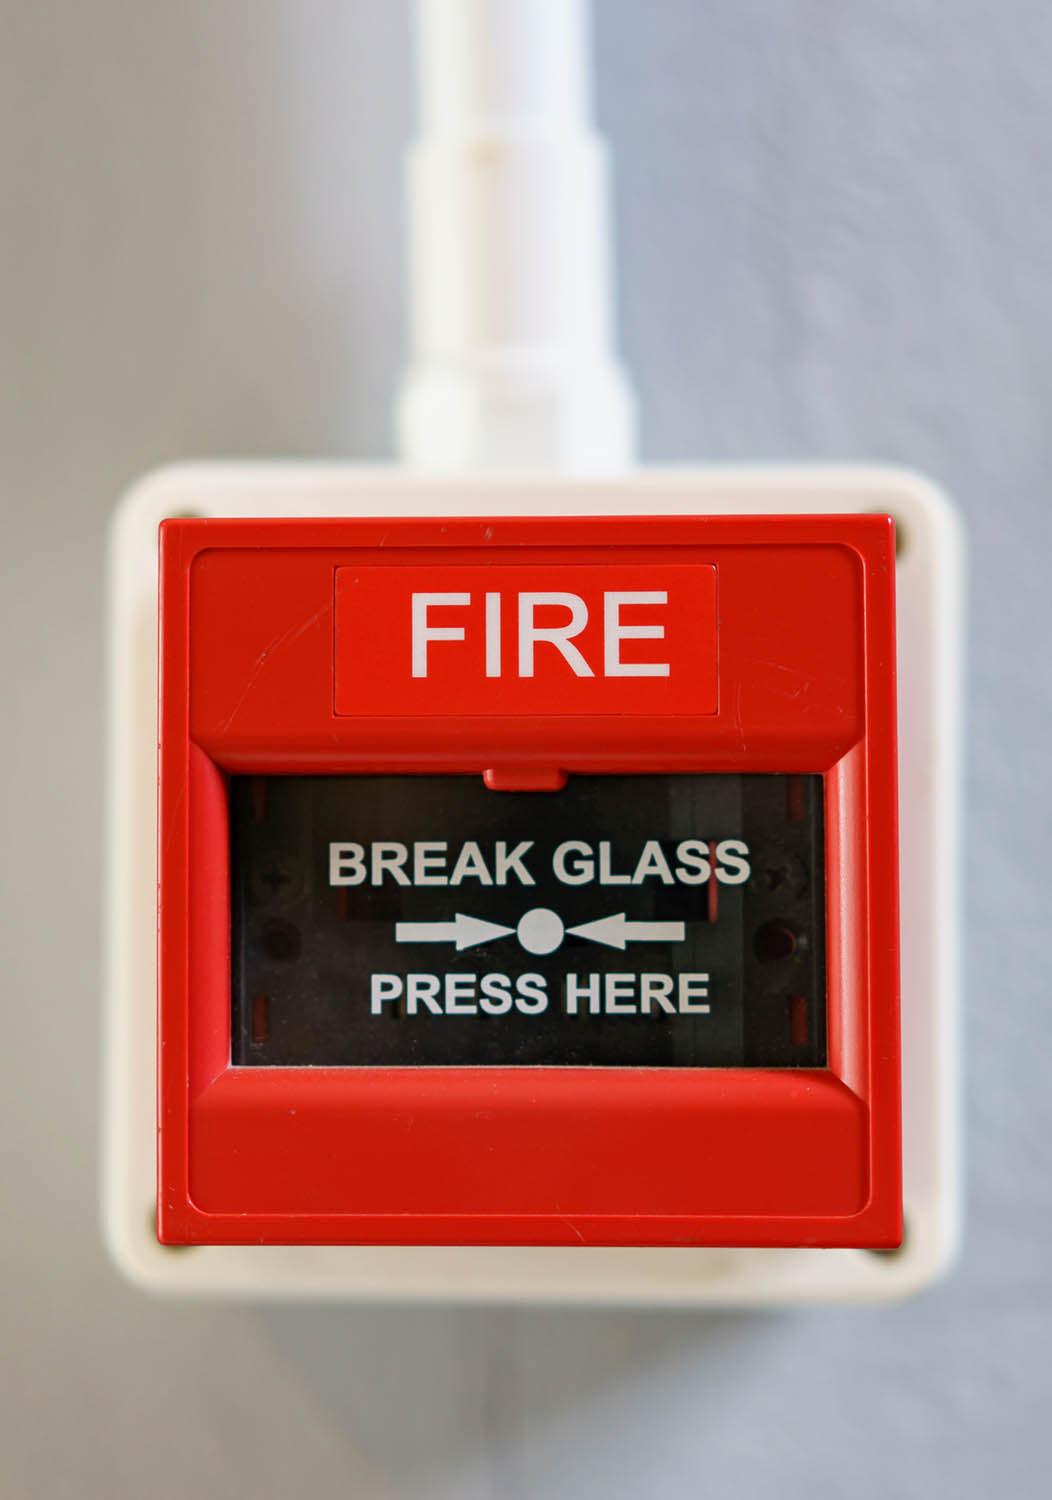 A red fire call point with break glass wording